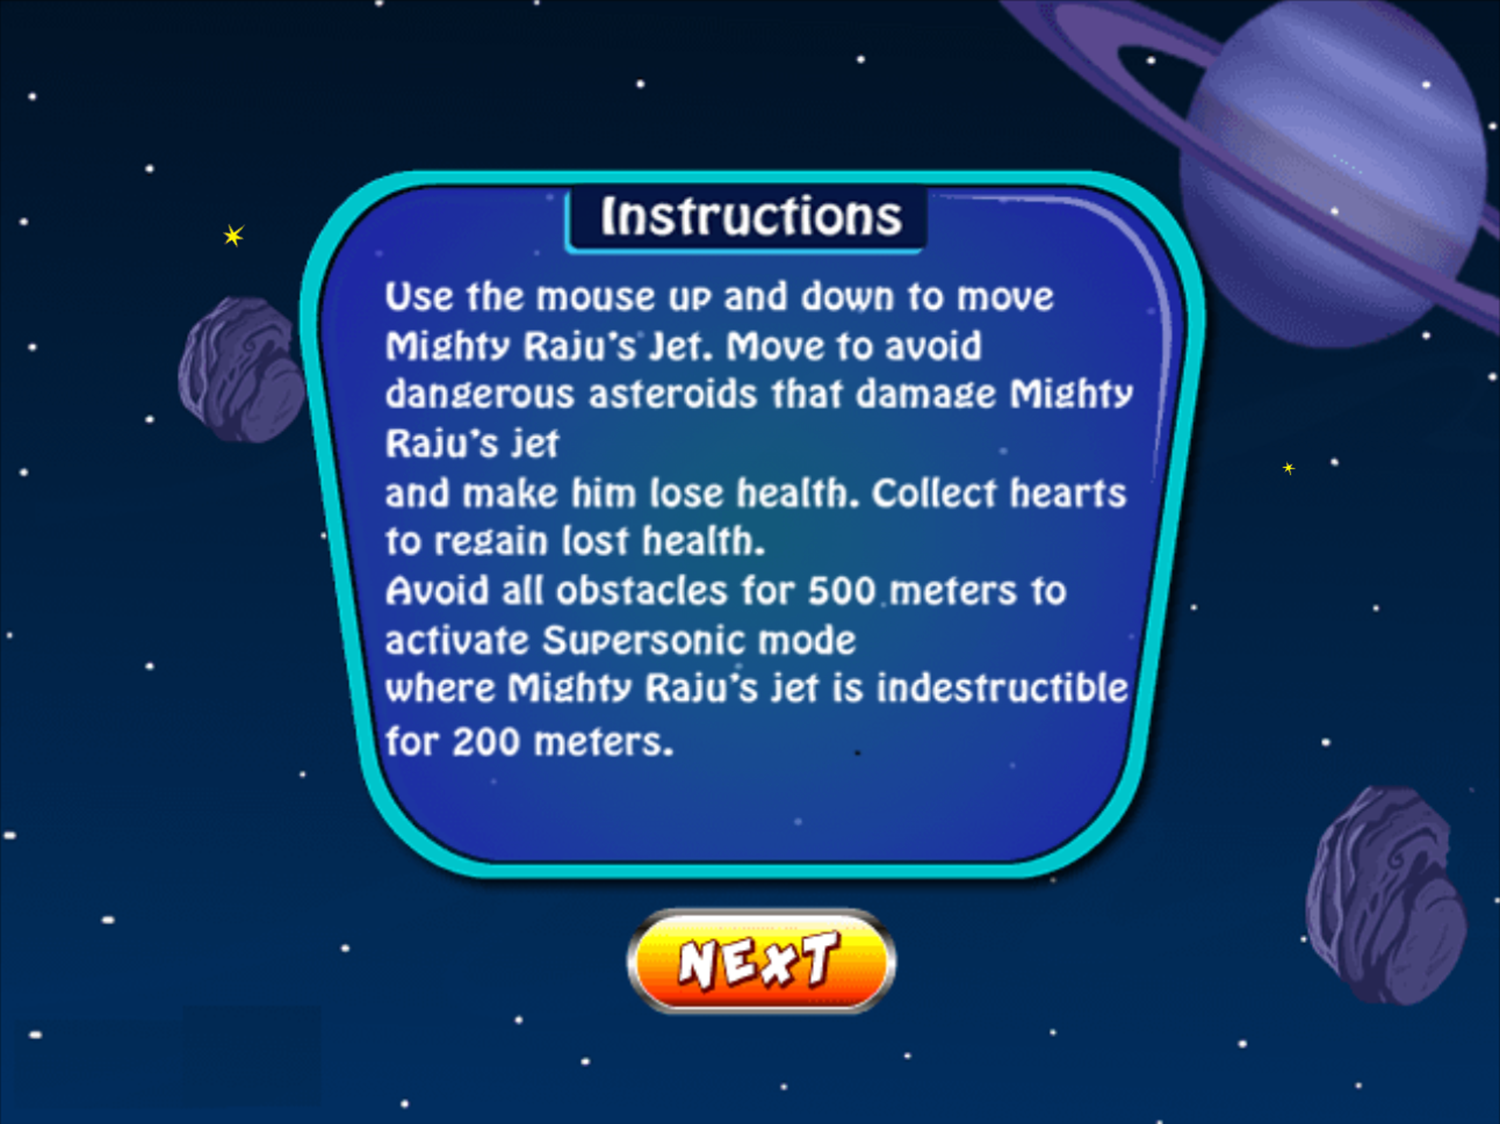 Mighty Raju and His Space Adventure Game Instructions Screenshot.